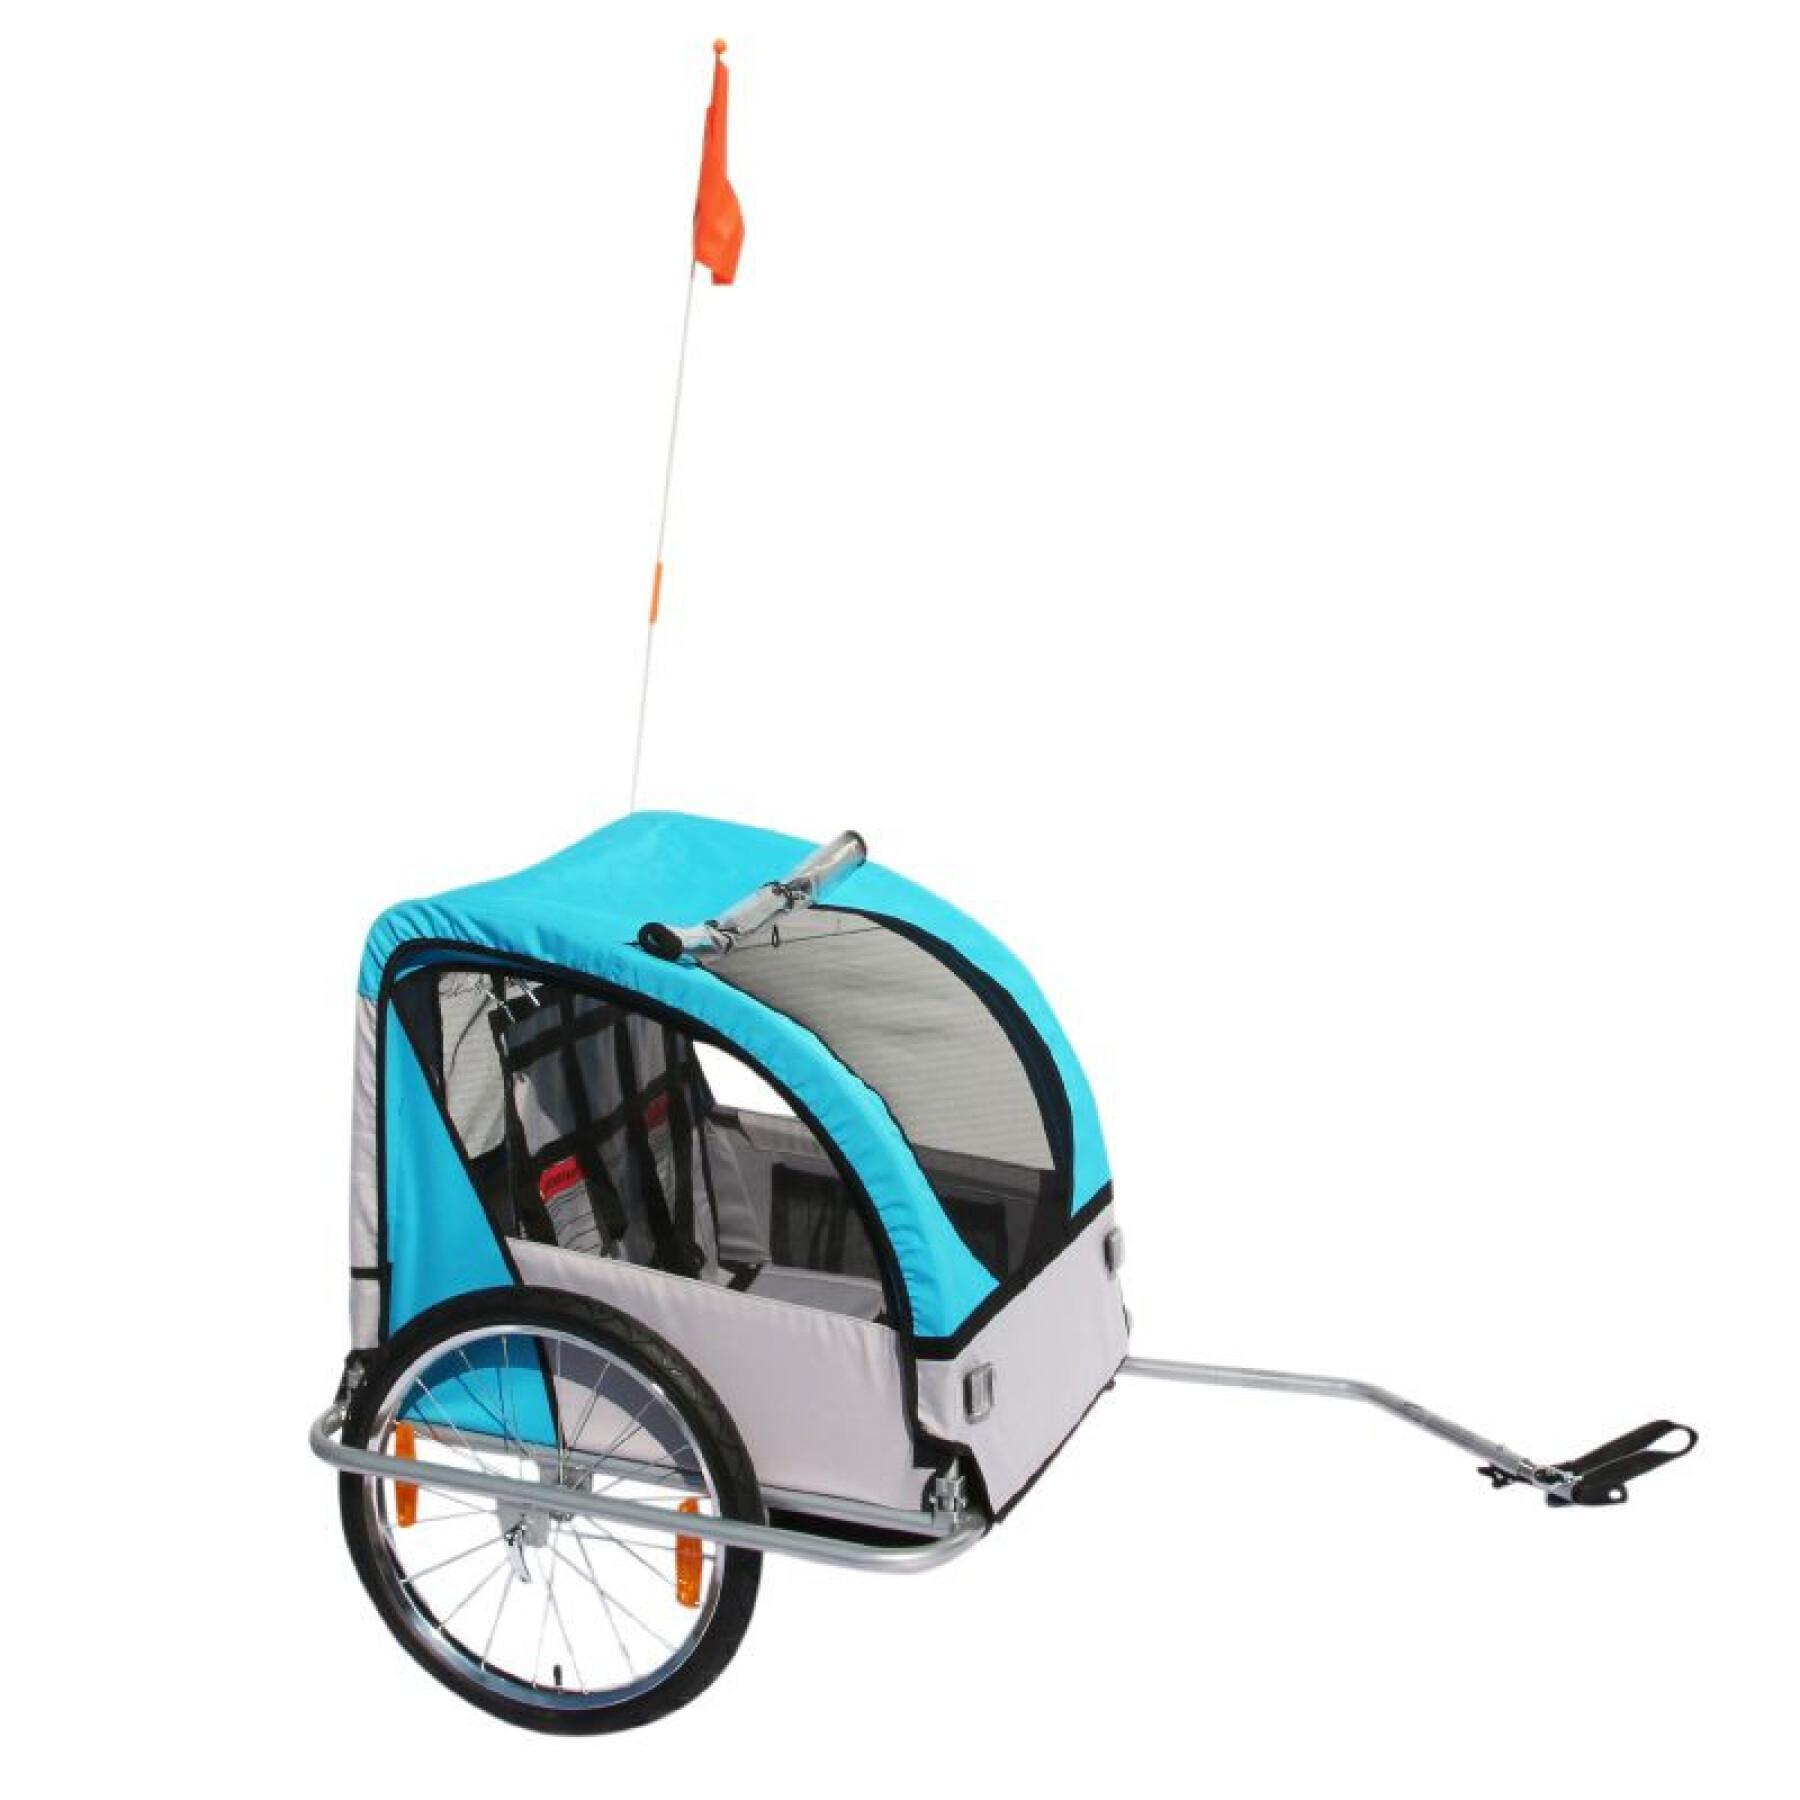 Covered bicycle trailer 2 seats max. locking and fixing rear wheel axle - assembly rapide without tools P2R 45 Kg